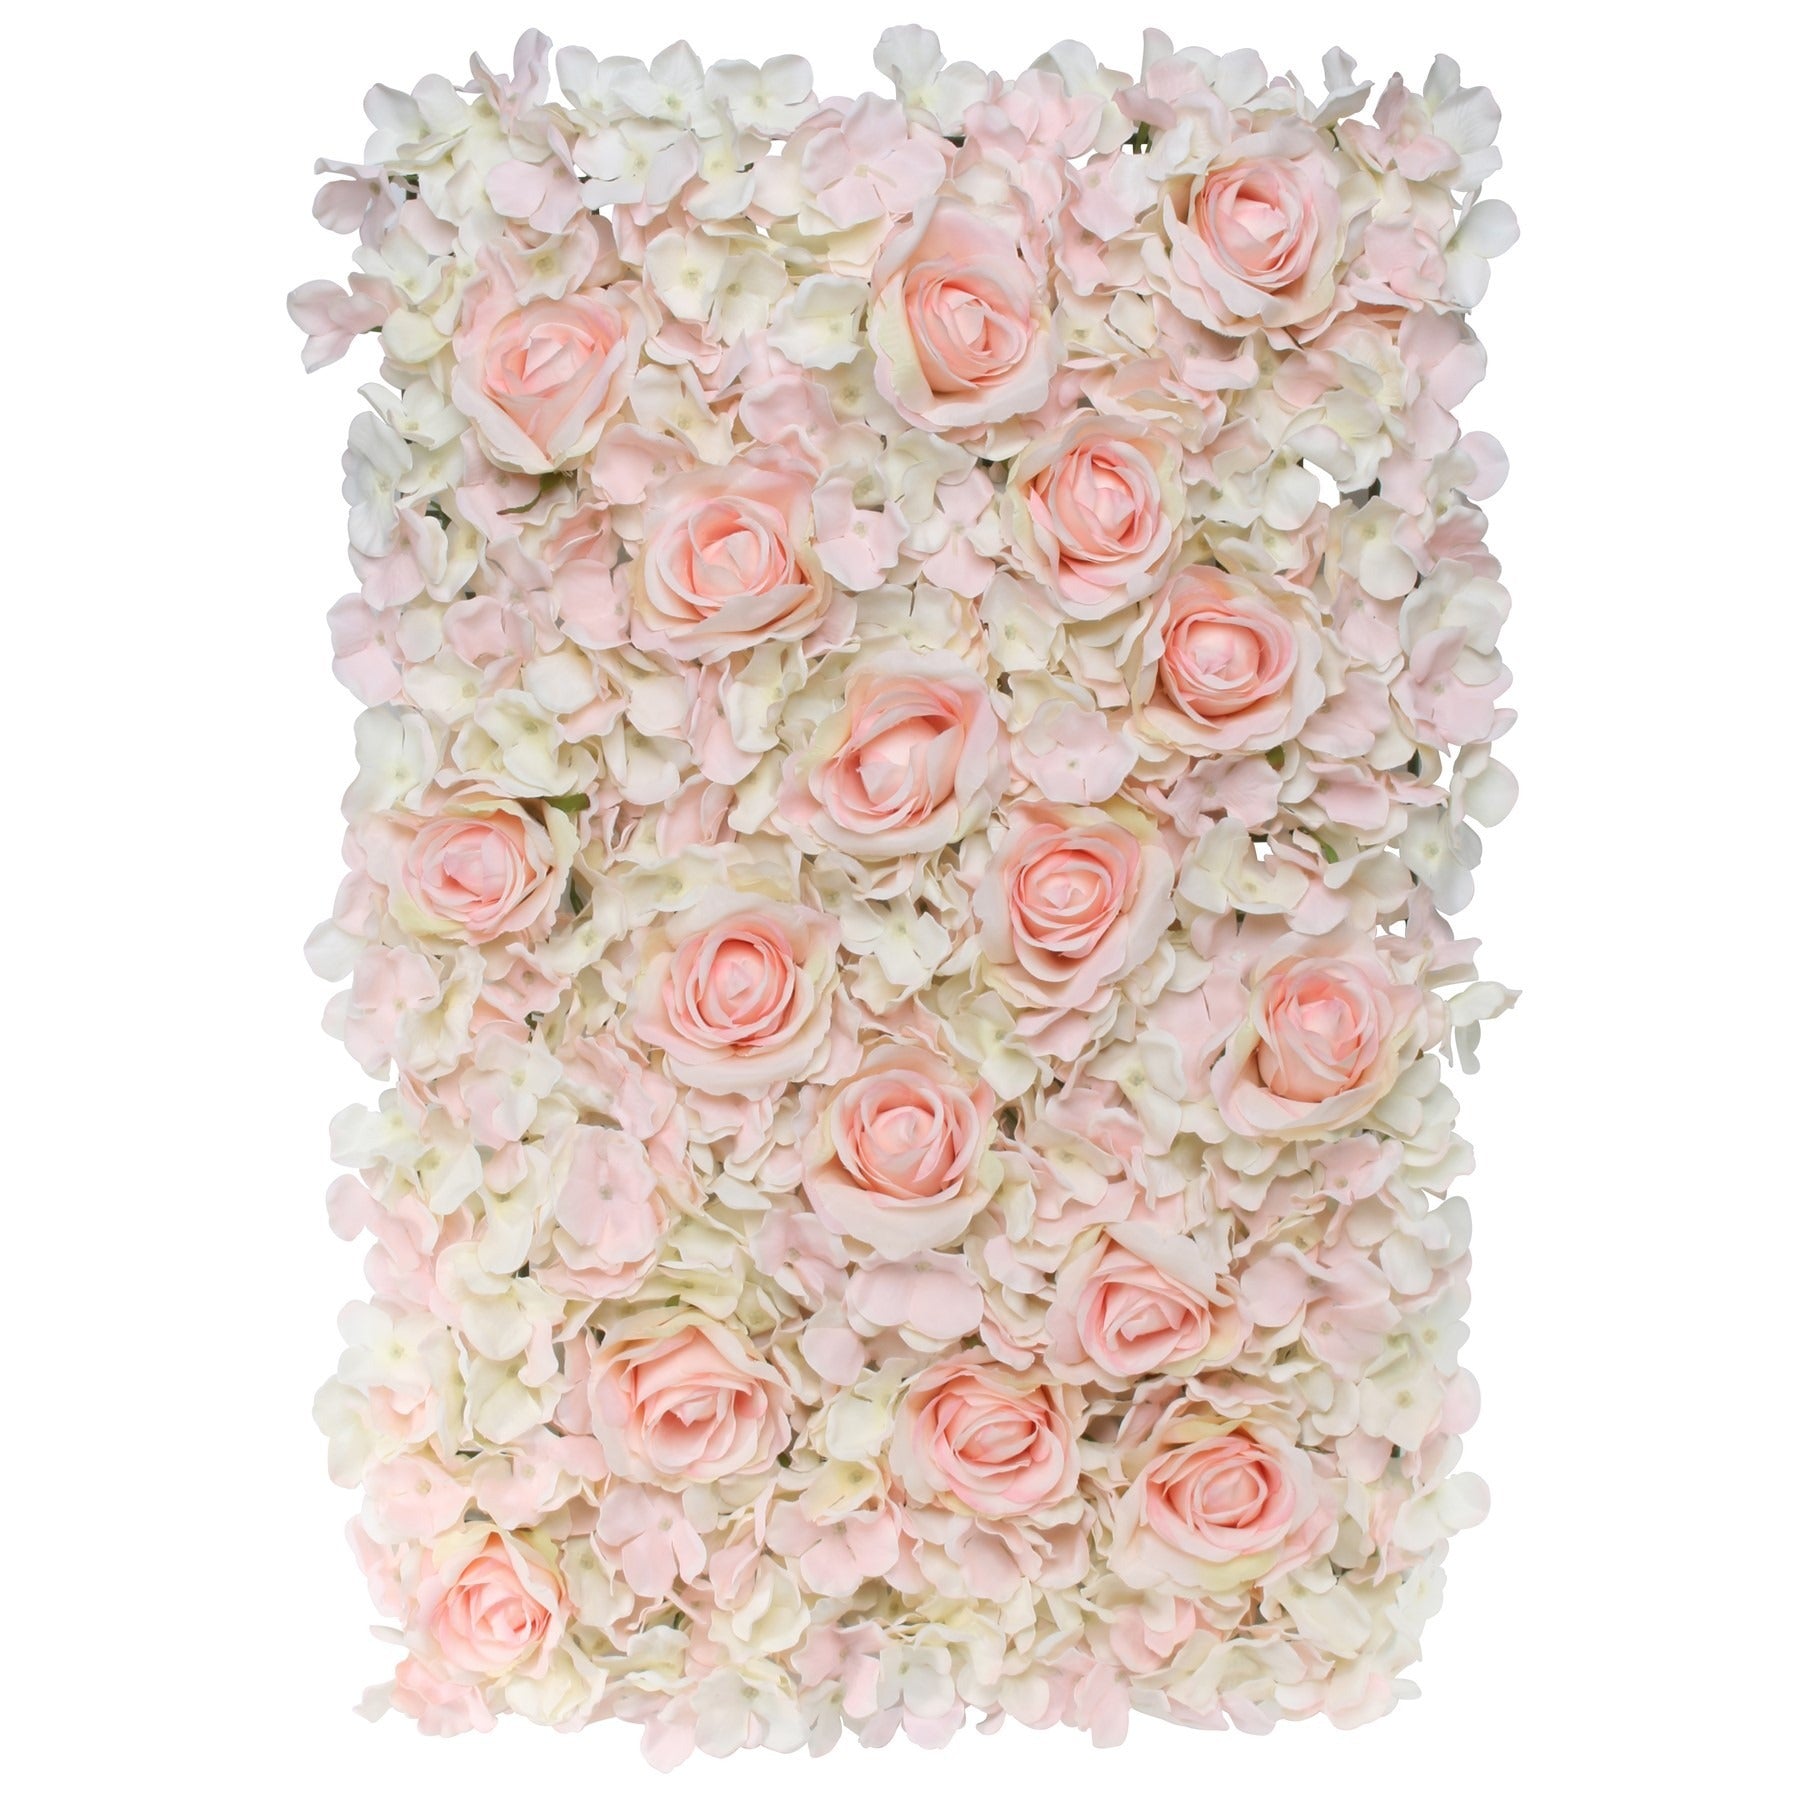 View 40x60cm Hydrangea Flower Wall with Roses Pink information